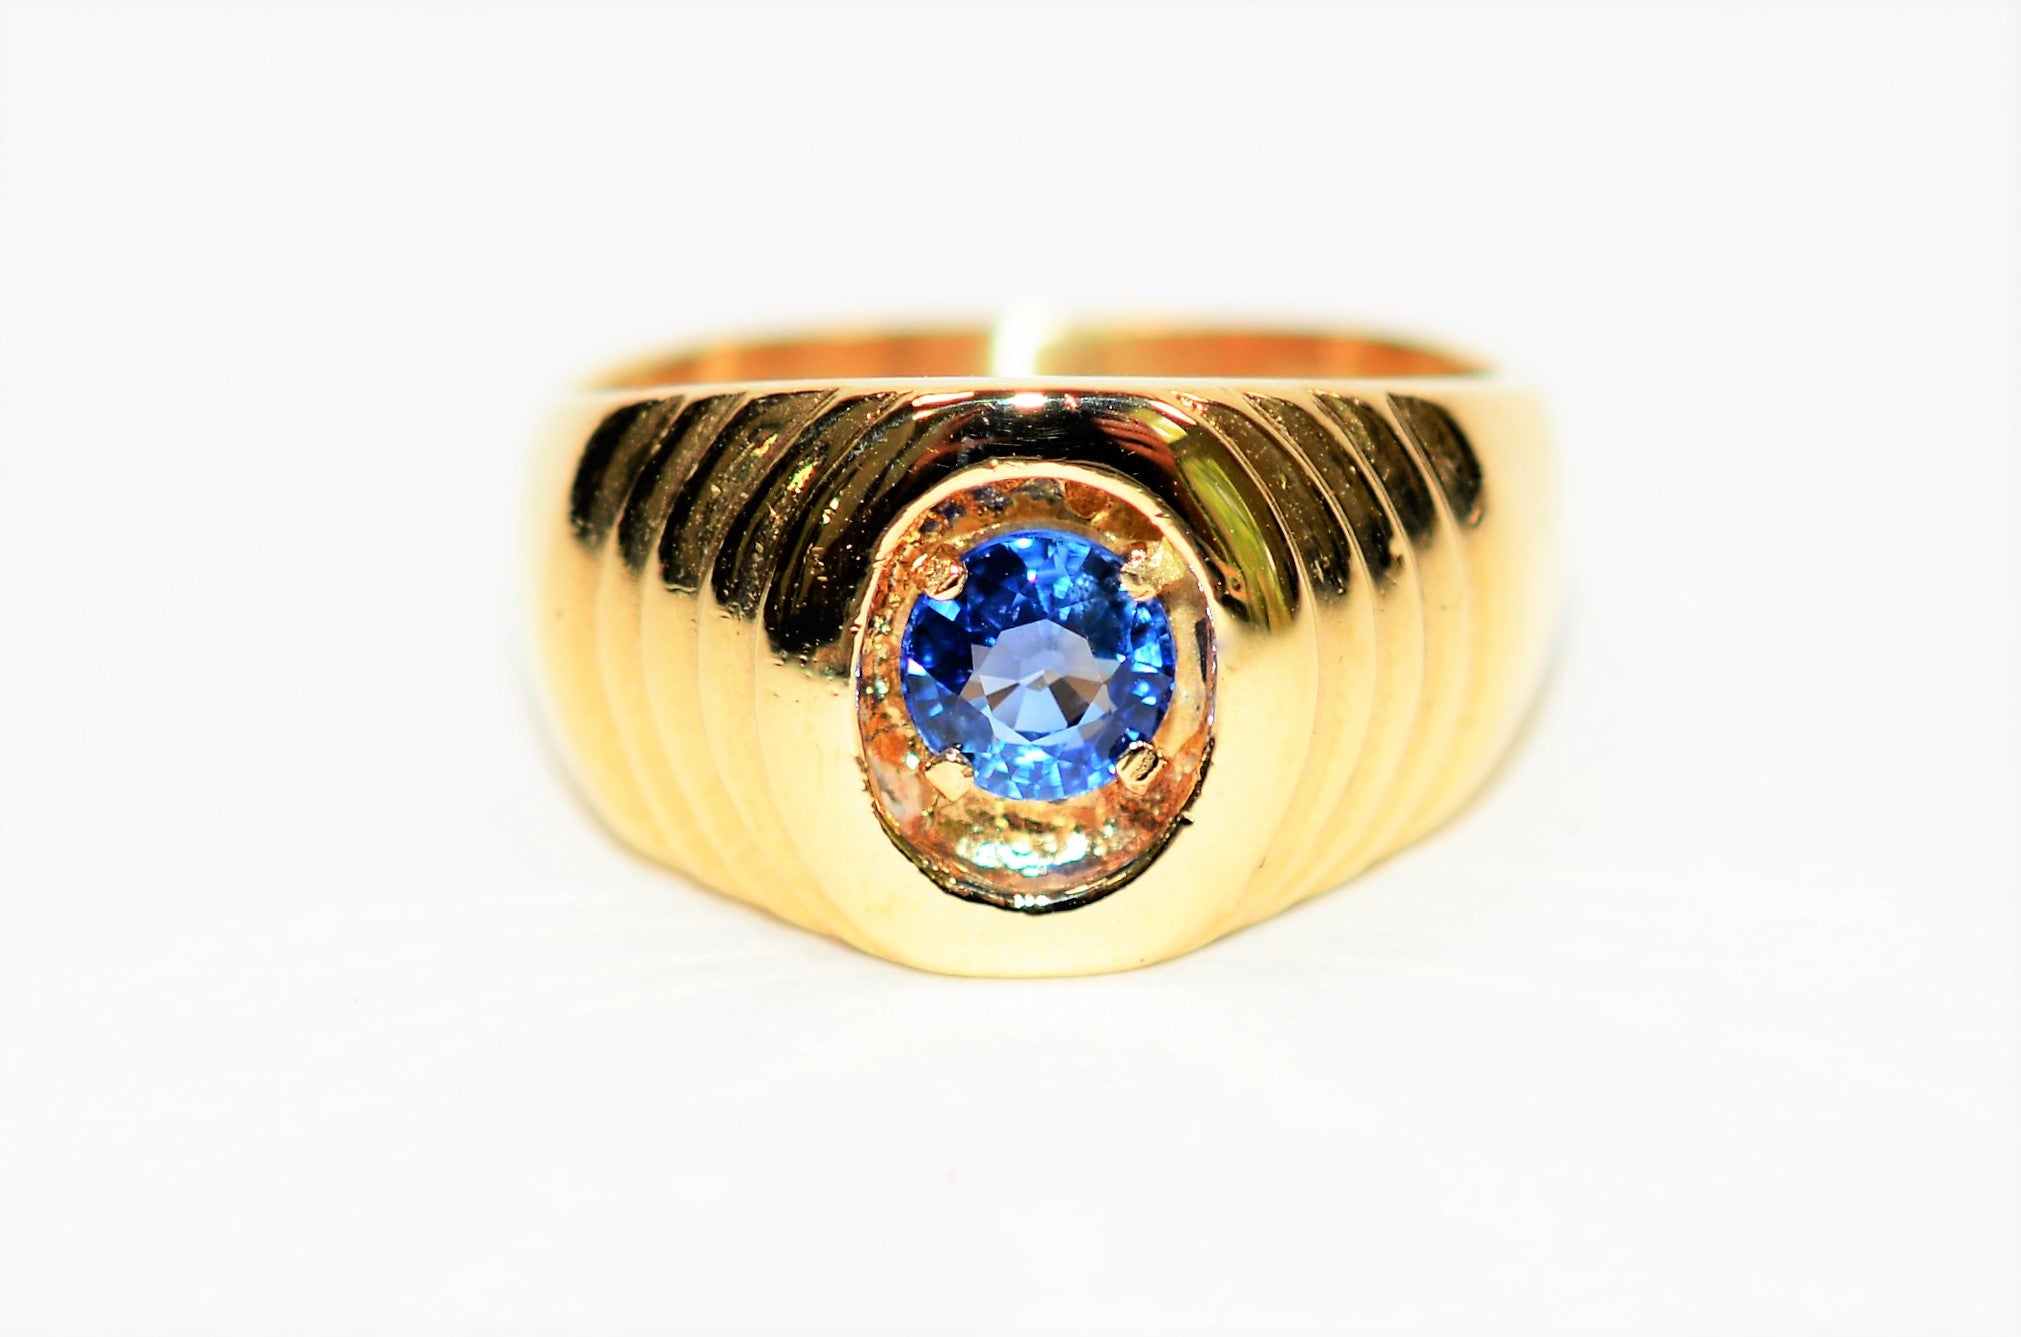 Natural Ceylon Sapphire Ring 14K Solid Gold .71ct Sri Lankan Sapphire Ring Solitaire Ring Gemstone Ring Men's Ring Estate Jewelry Jewellery